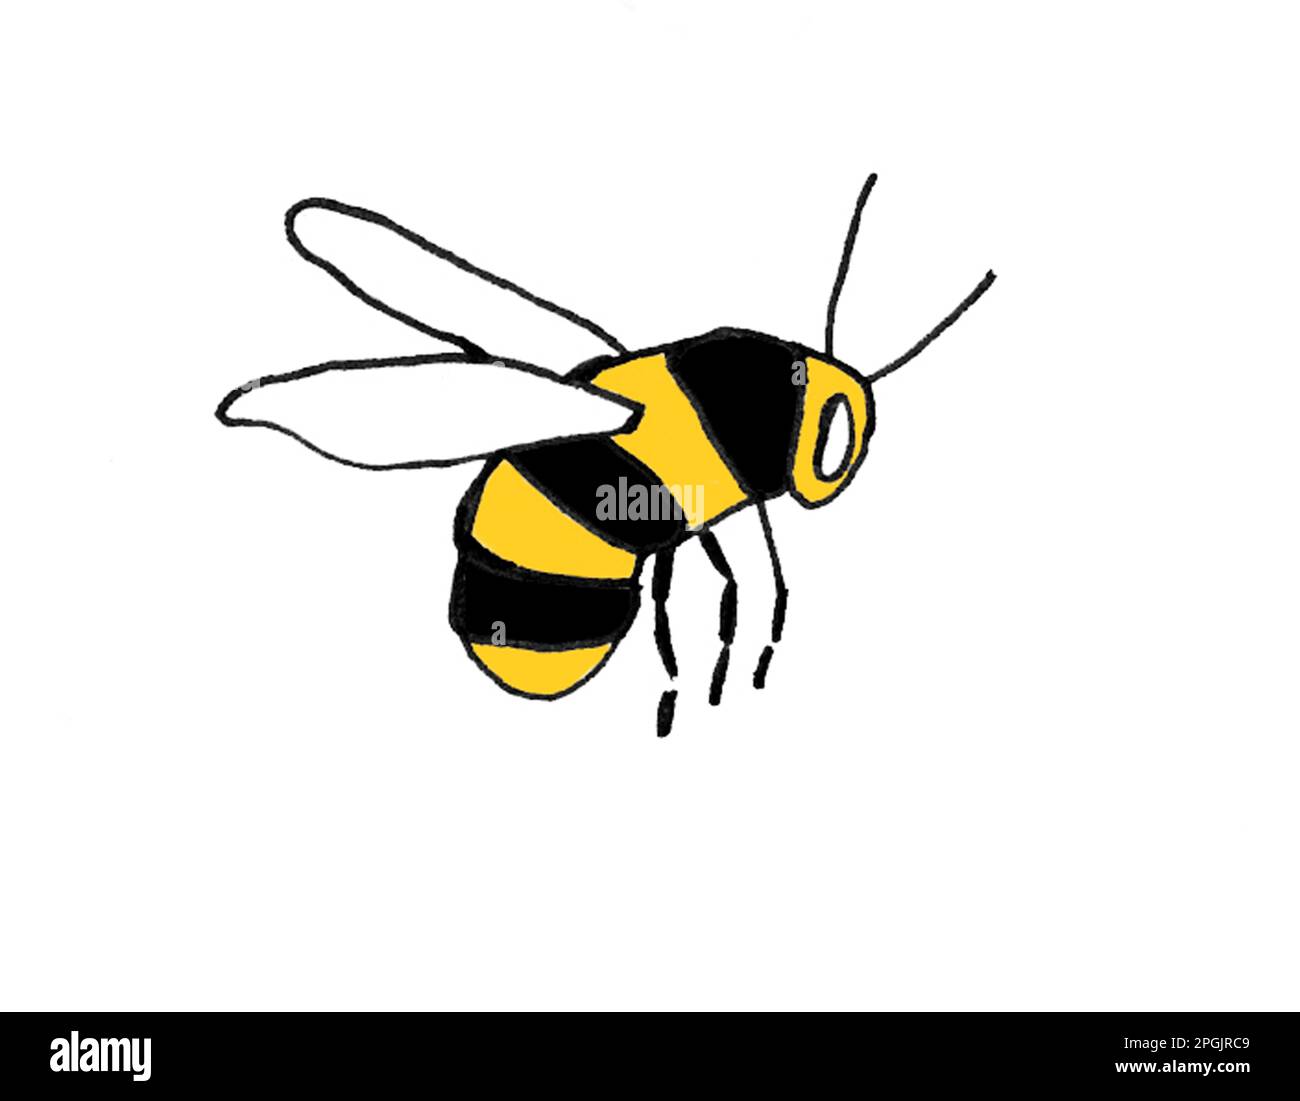 Illustration of a bee Stock Photo